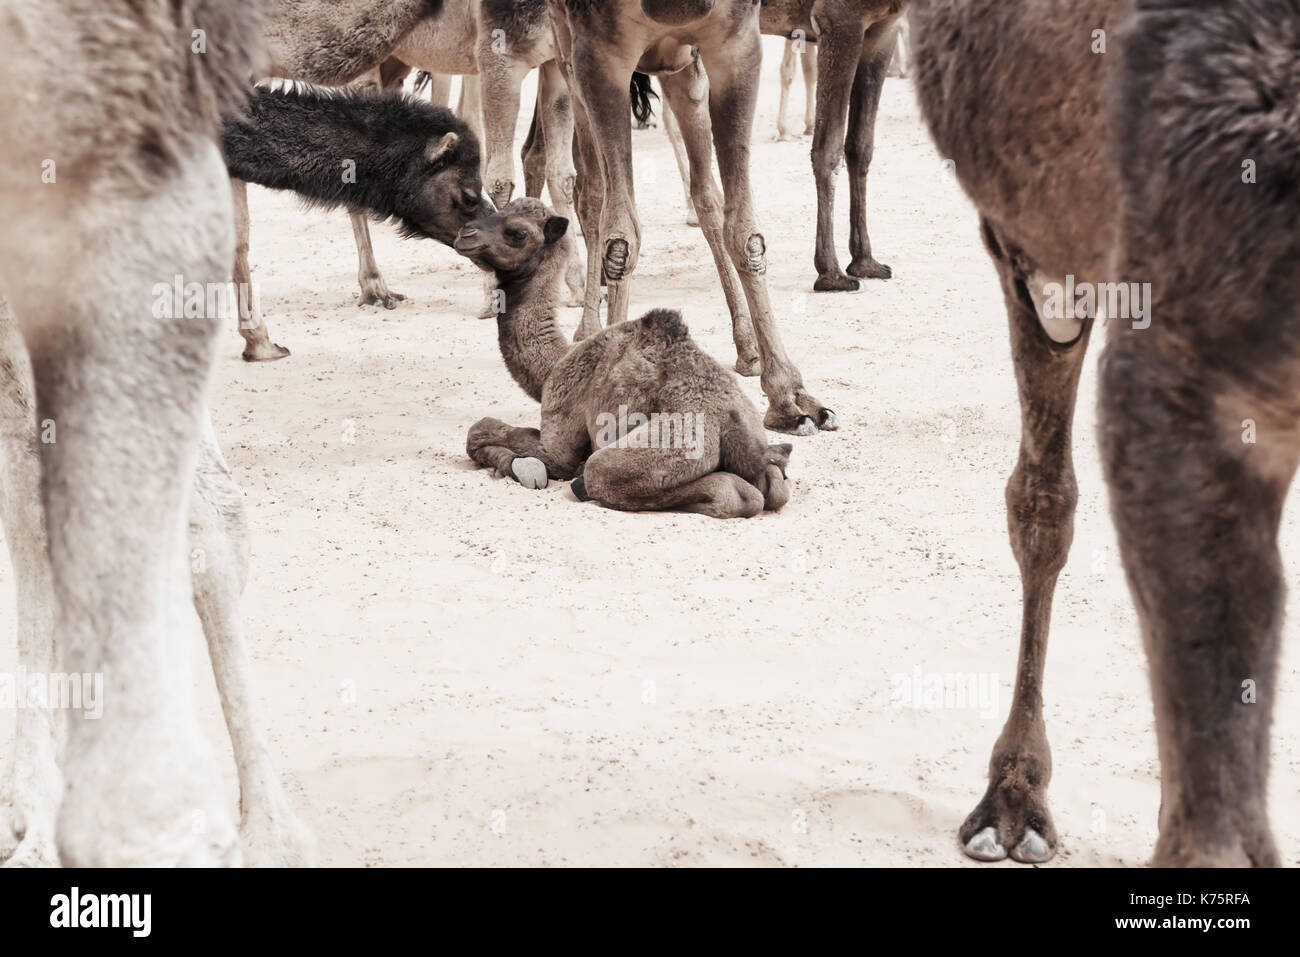 A camel (dromedary) baby lays on the ground, surrounded by camels. Stock Photo